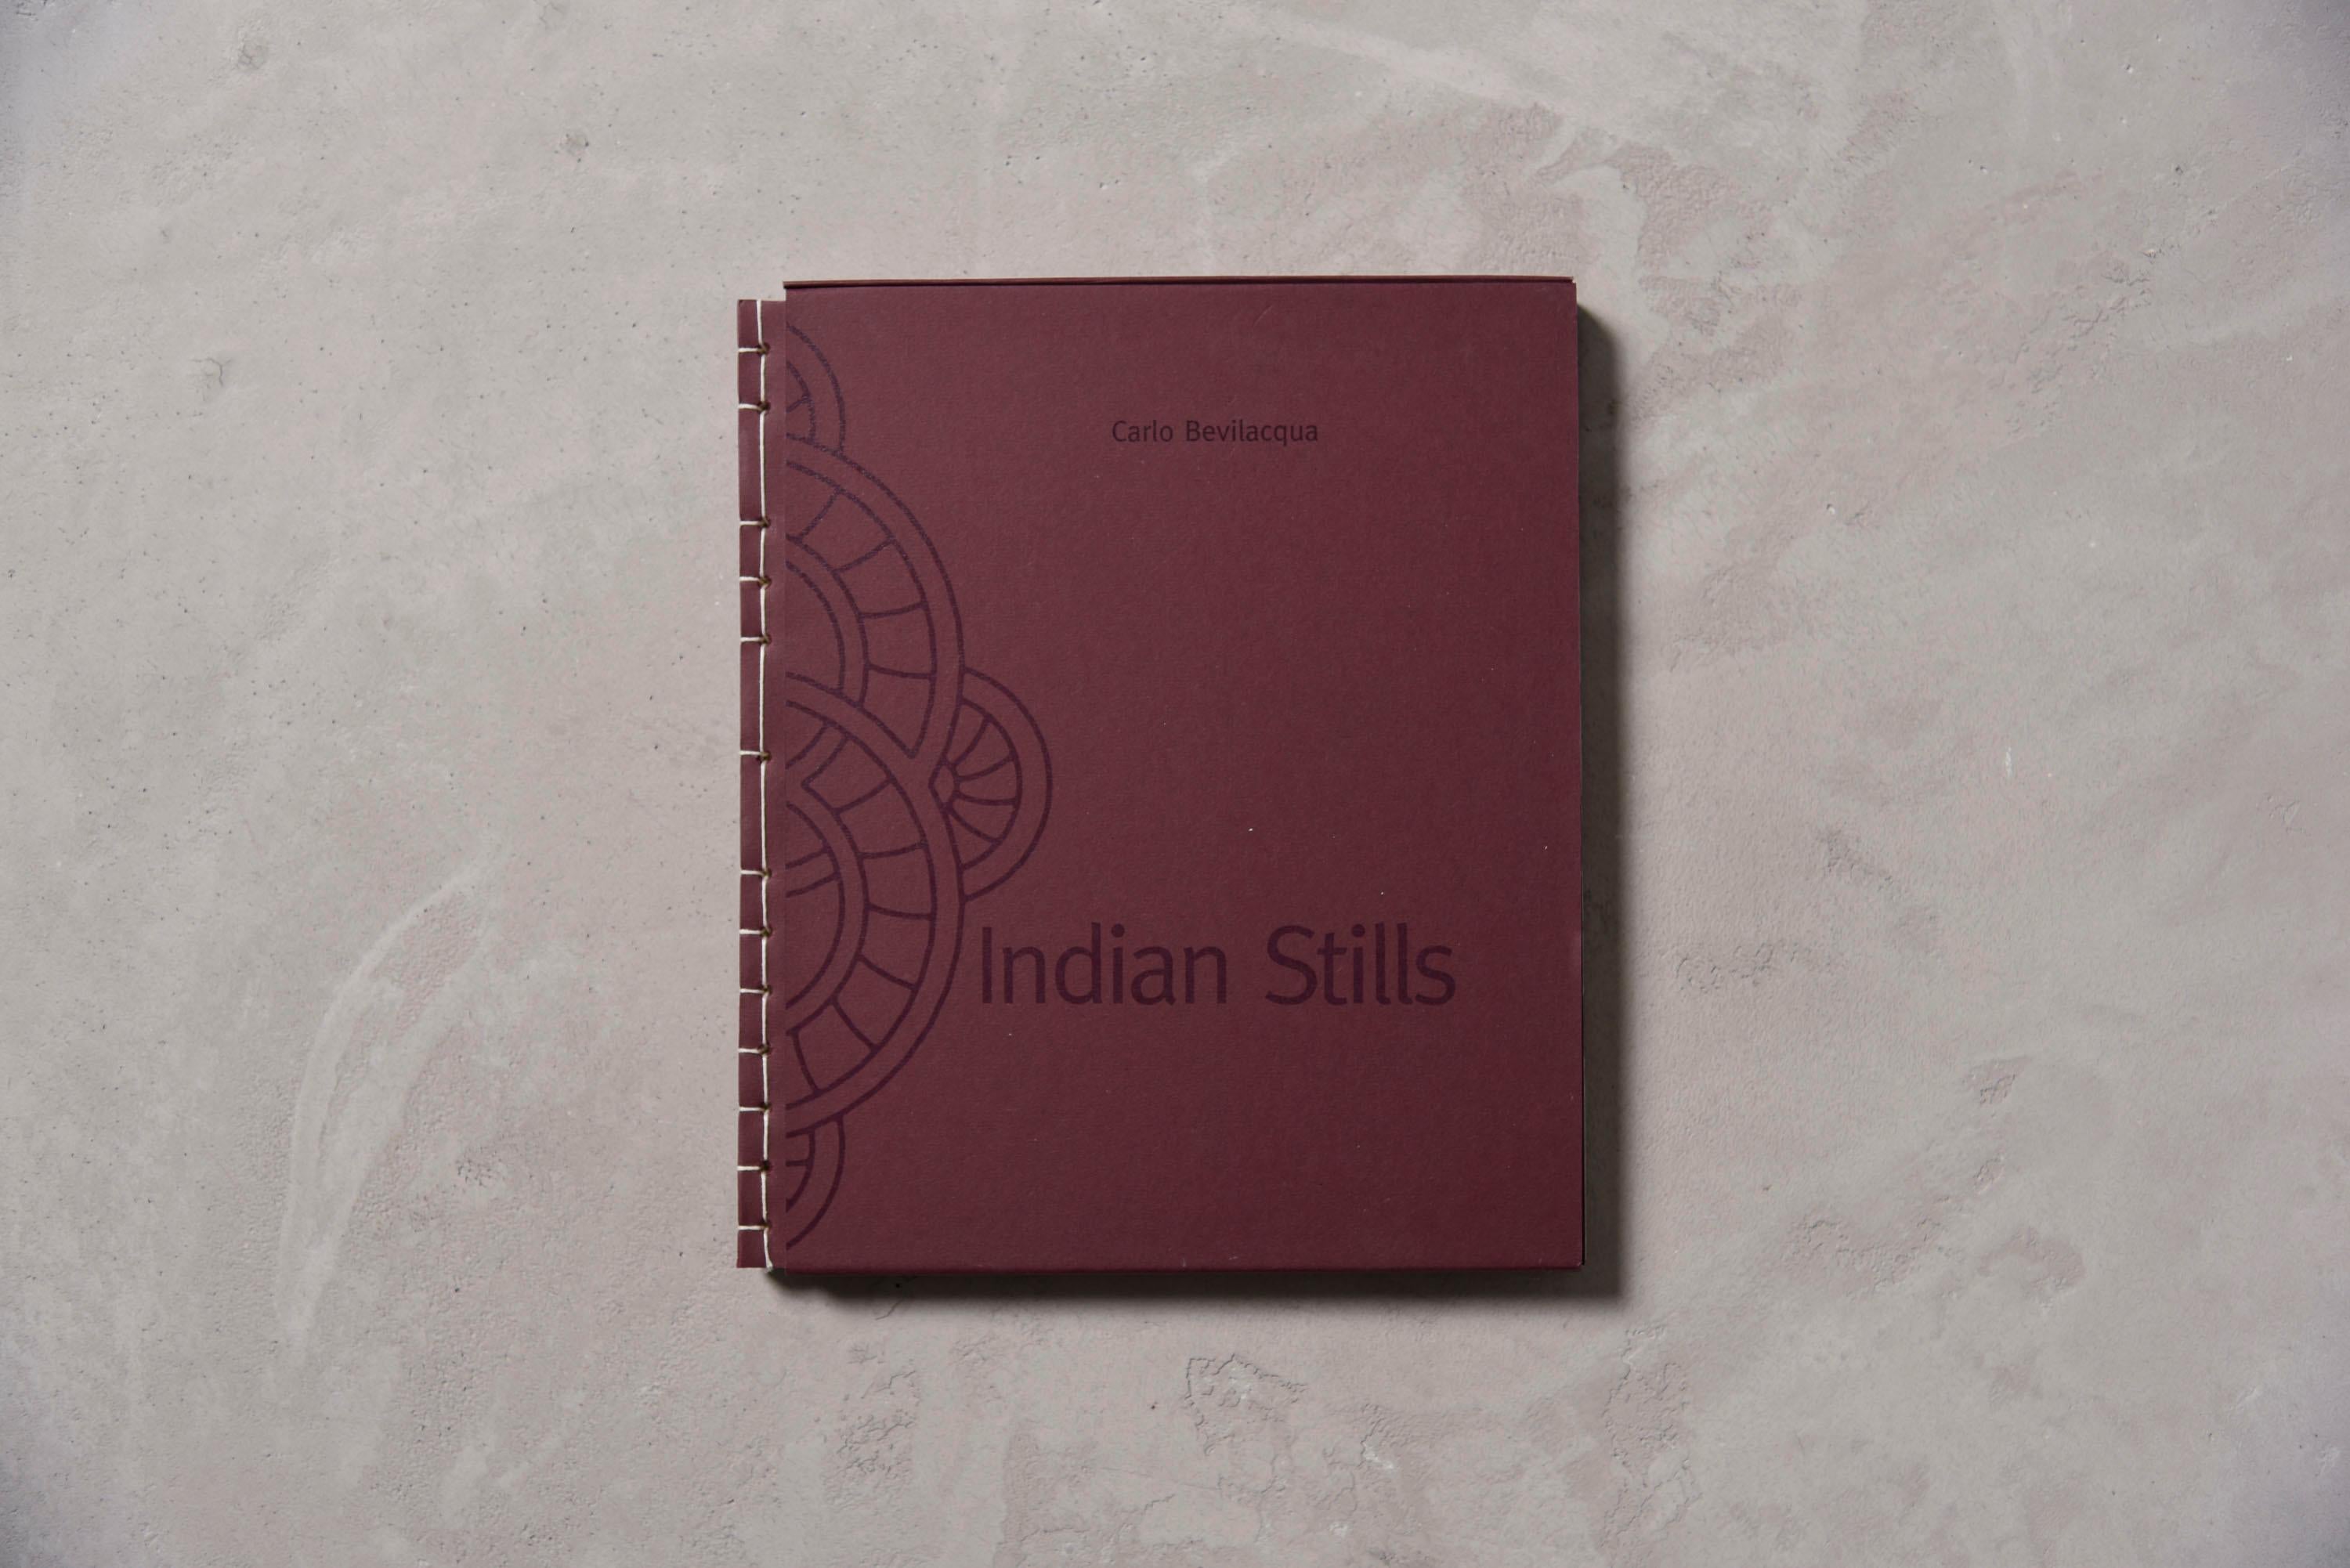 Indian Stills - Limited Edition Photo Book  - Photograph by Carlo Bevilacqua